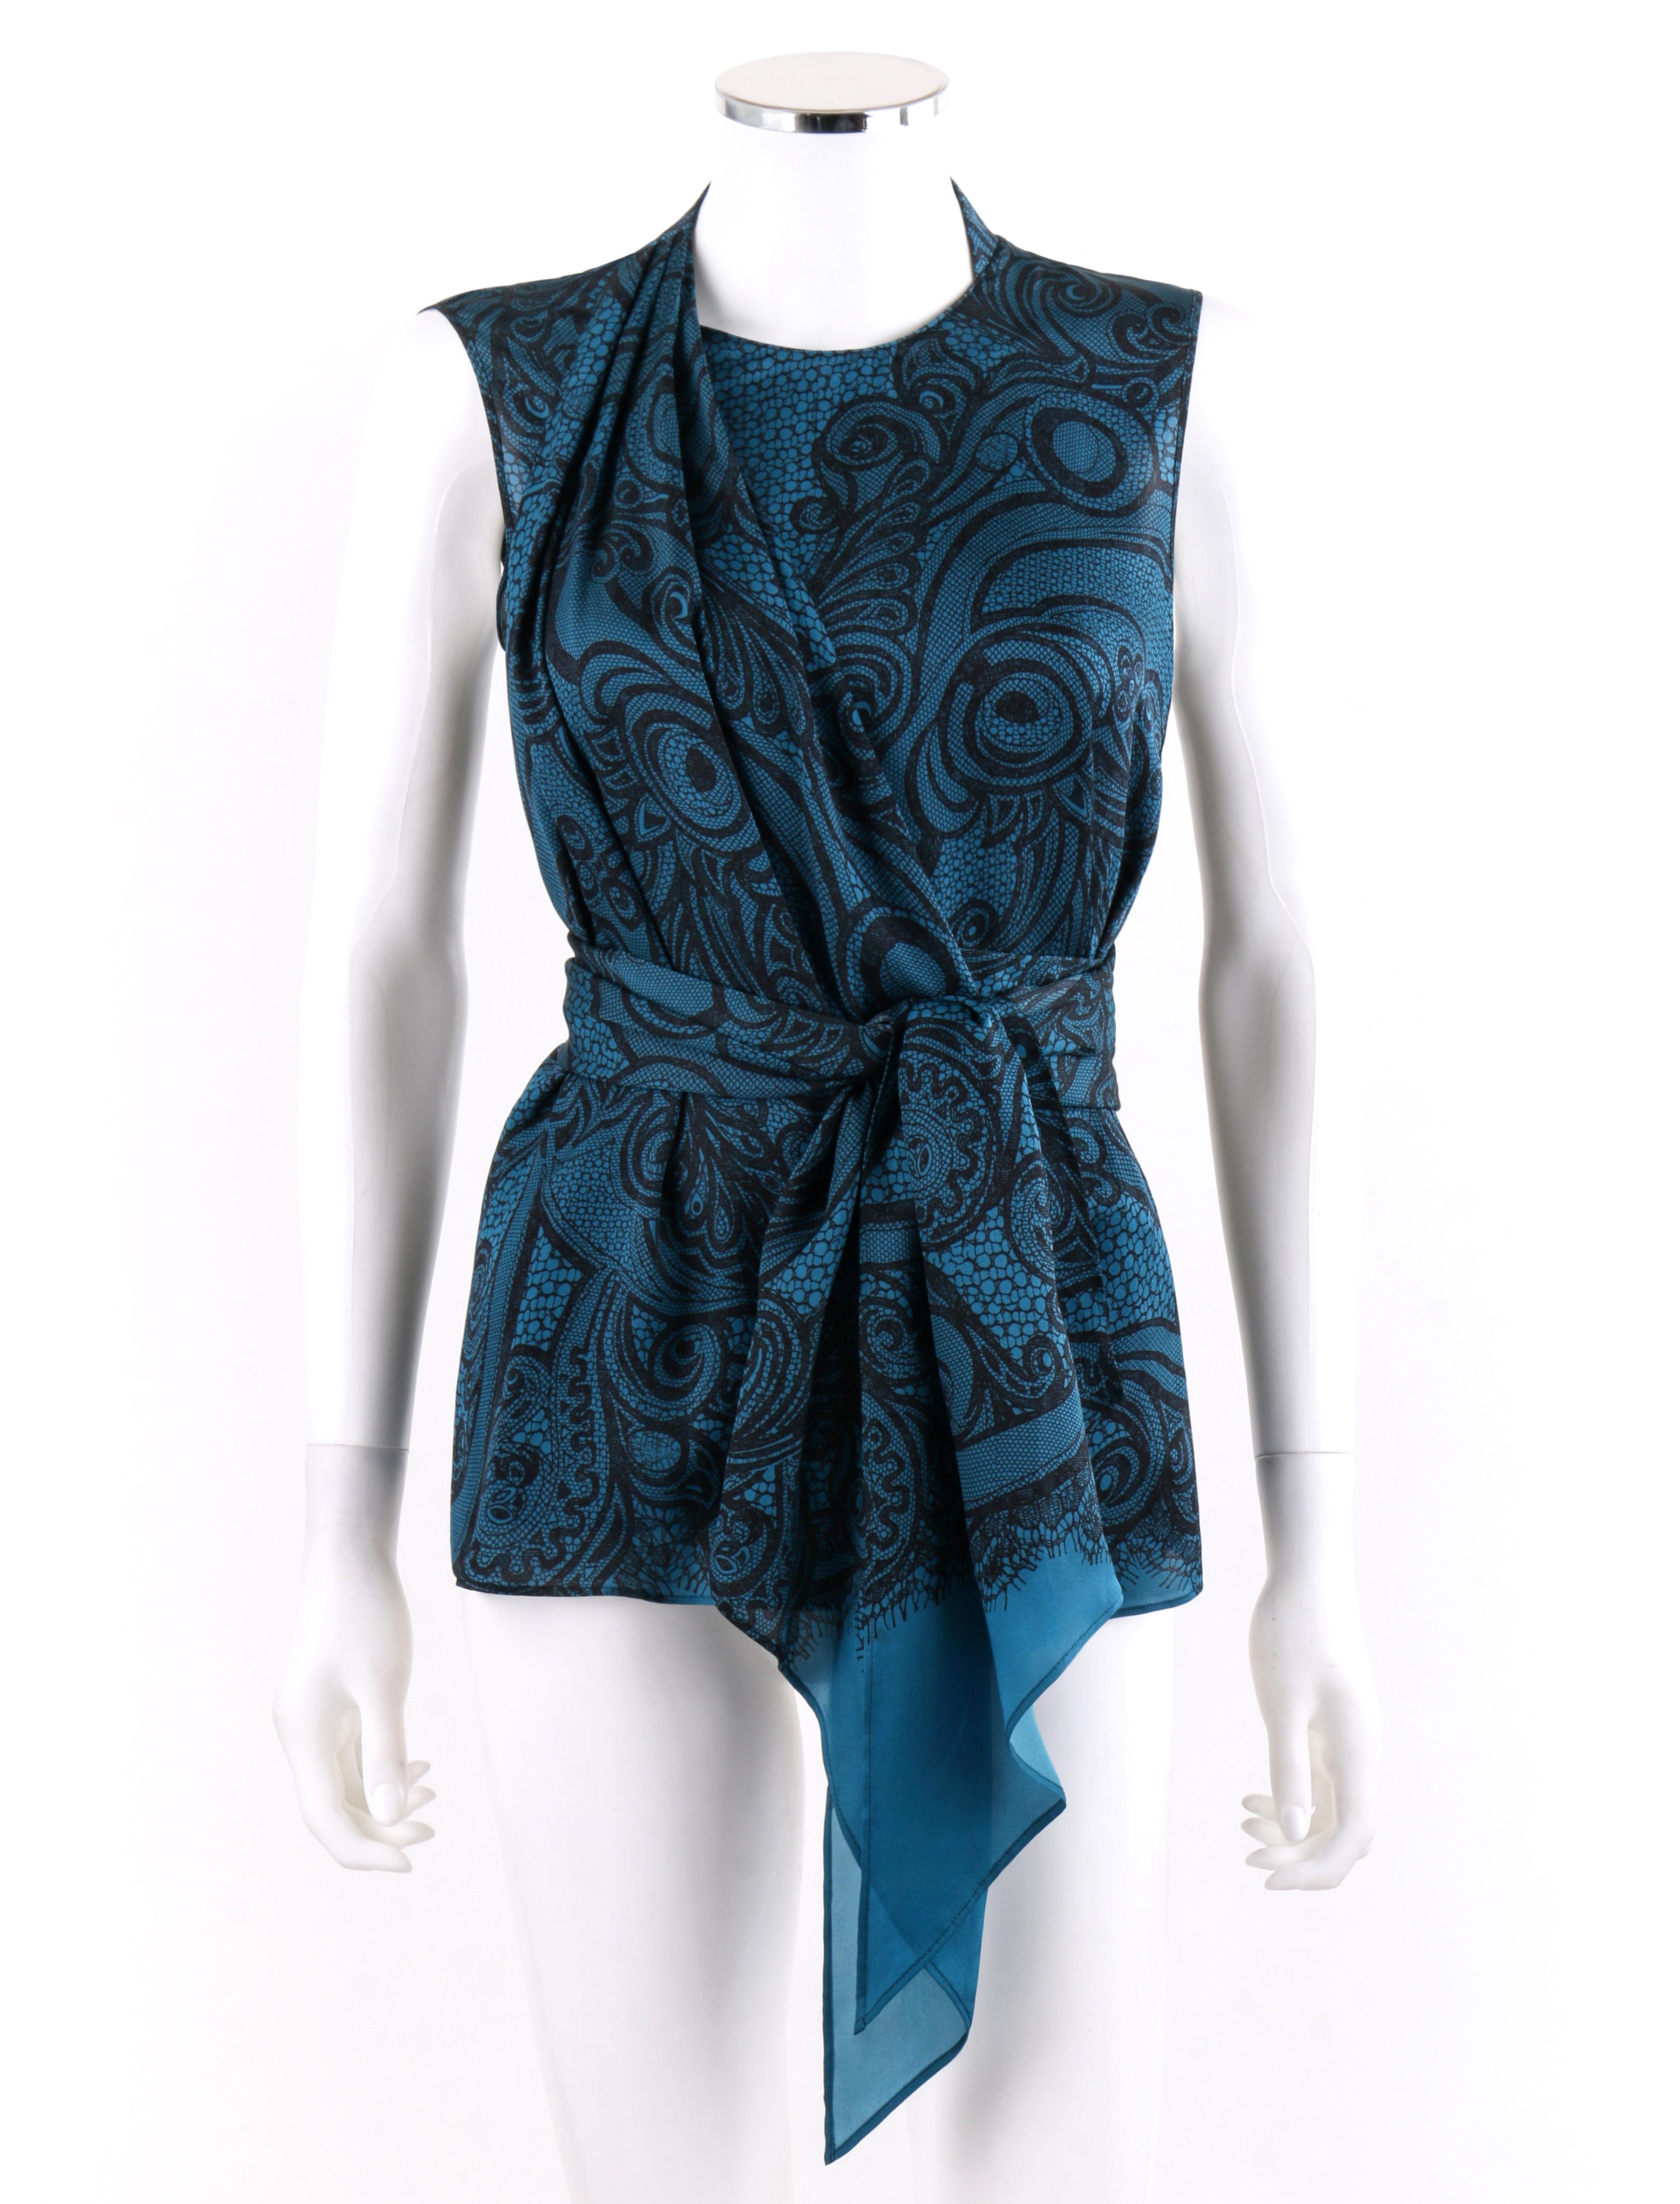 EMILIO PUCCI Teal Black Lace Print Sleeveless Silk Wrap Style Blouse Scarf Belt
  
Brand / Manufacturer: Emilio Pucci
Style: Asymmetric sleeveless ruched top (wrap look)
Color(s): Shades of blue/teal and black
Lined: No
Unmarked Fabric Content (feel